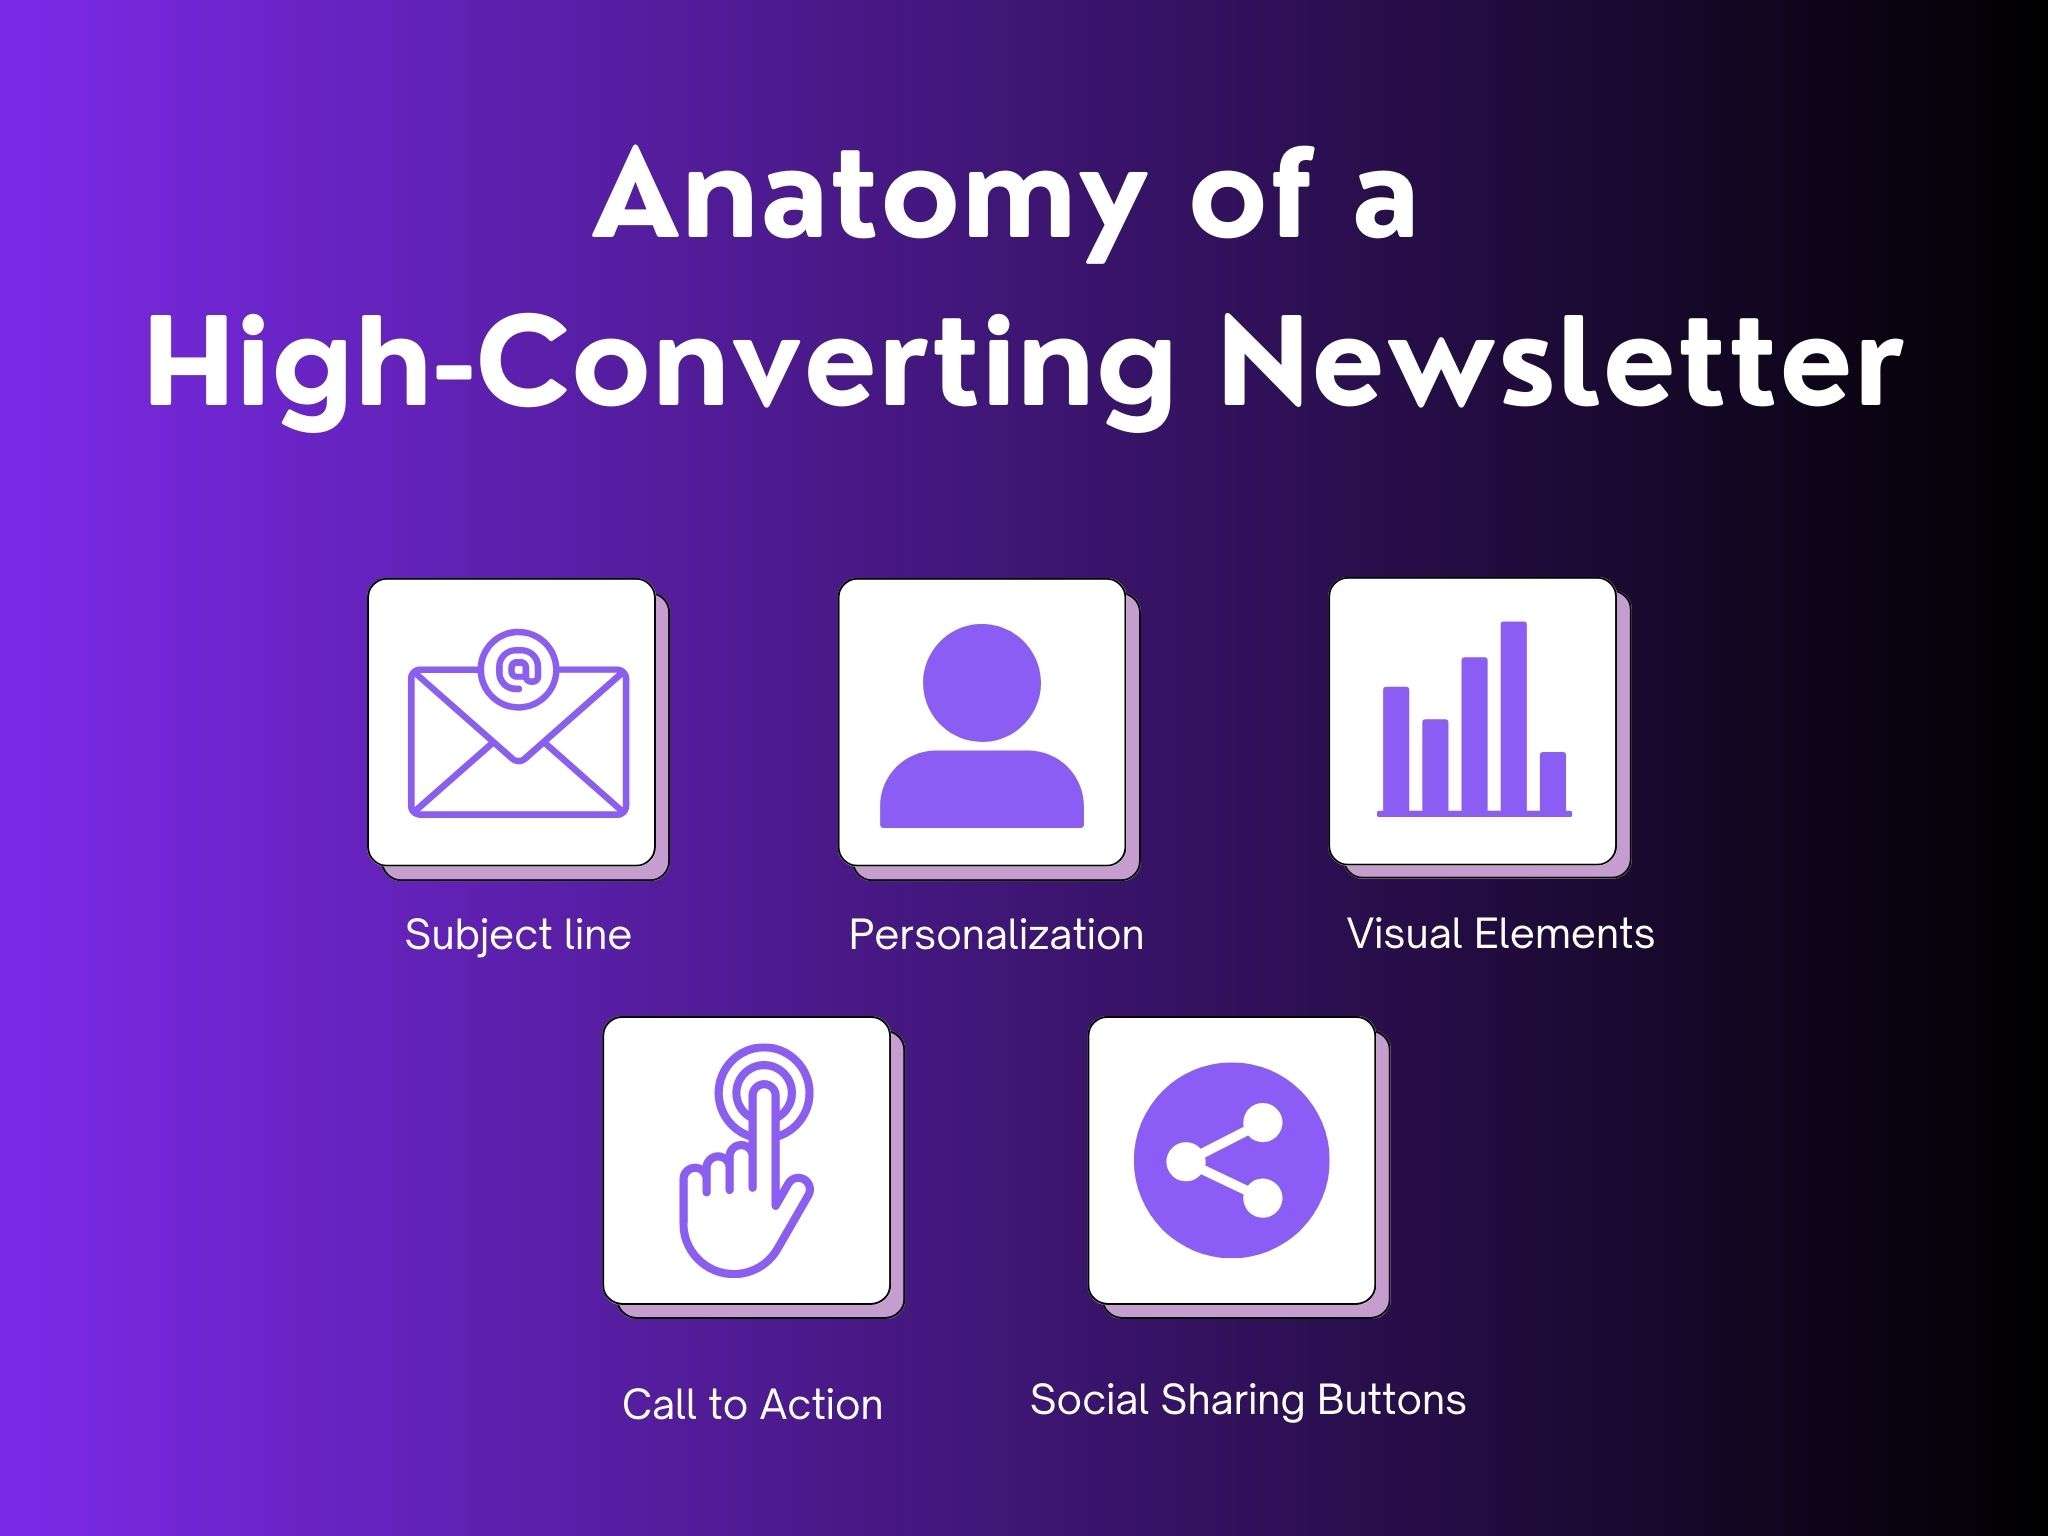 anatomy of a high-converting newsletter